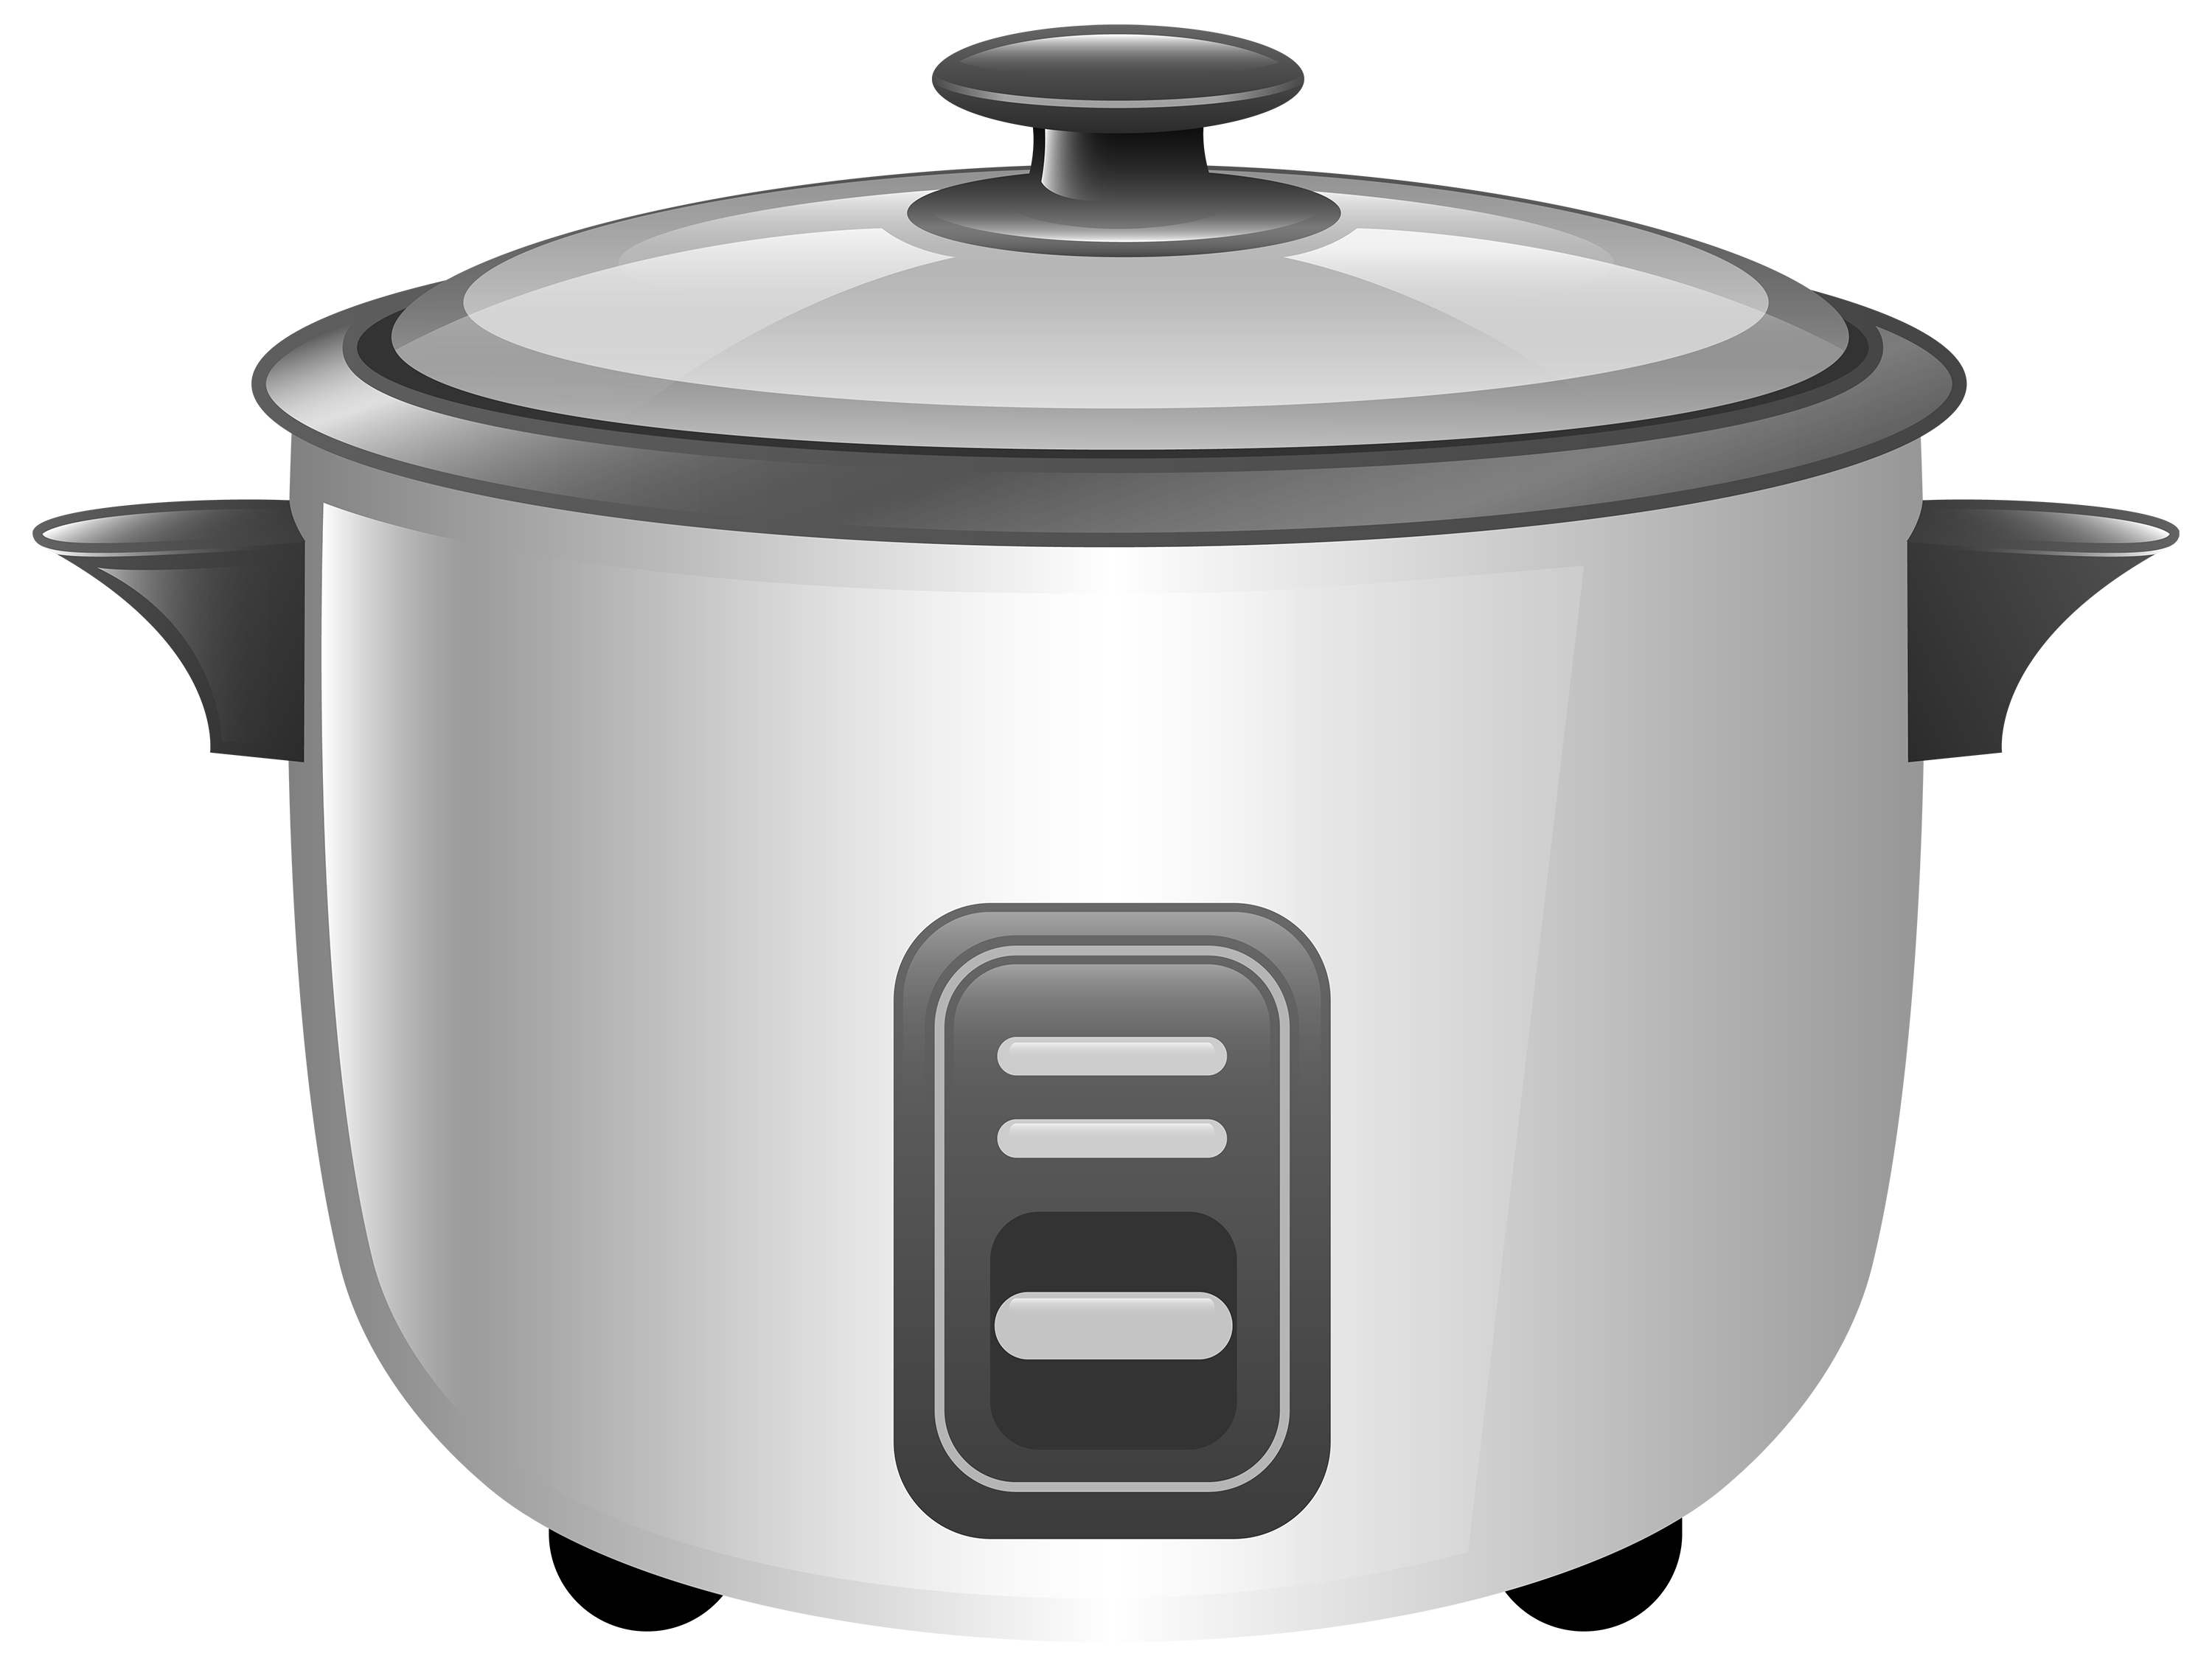 cooking clipart cooker